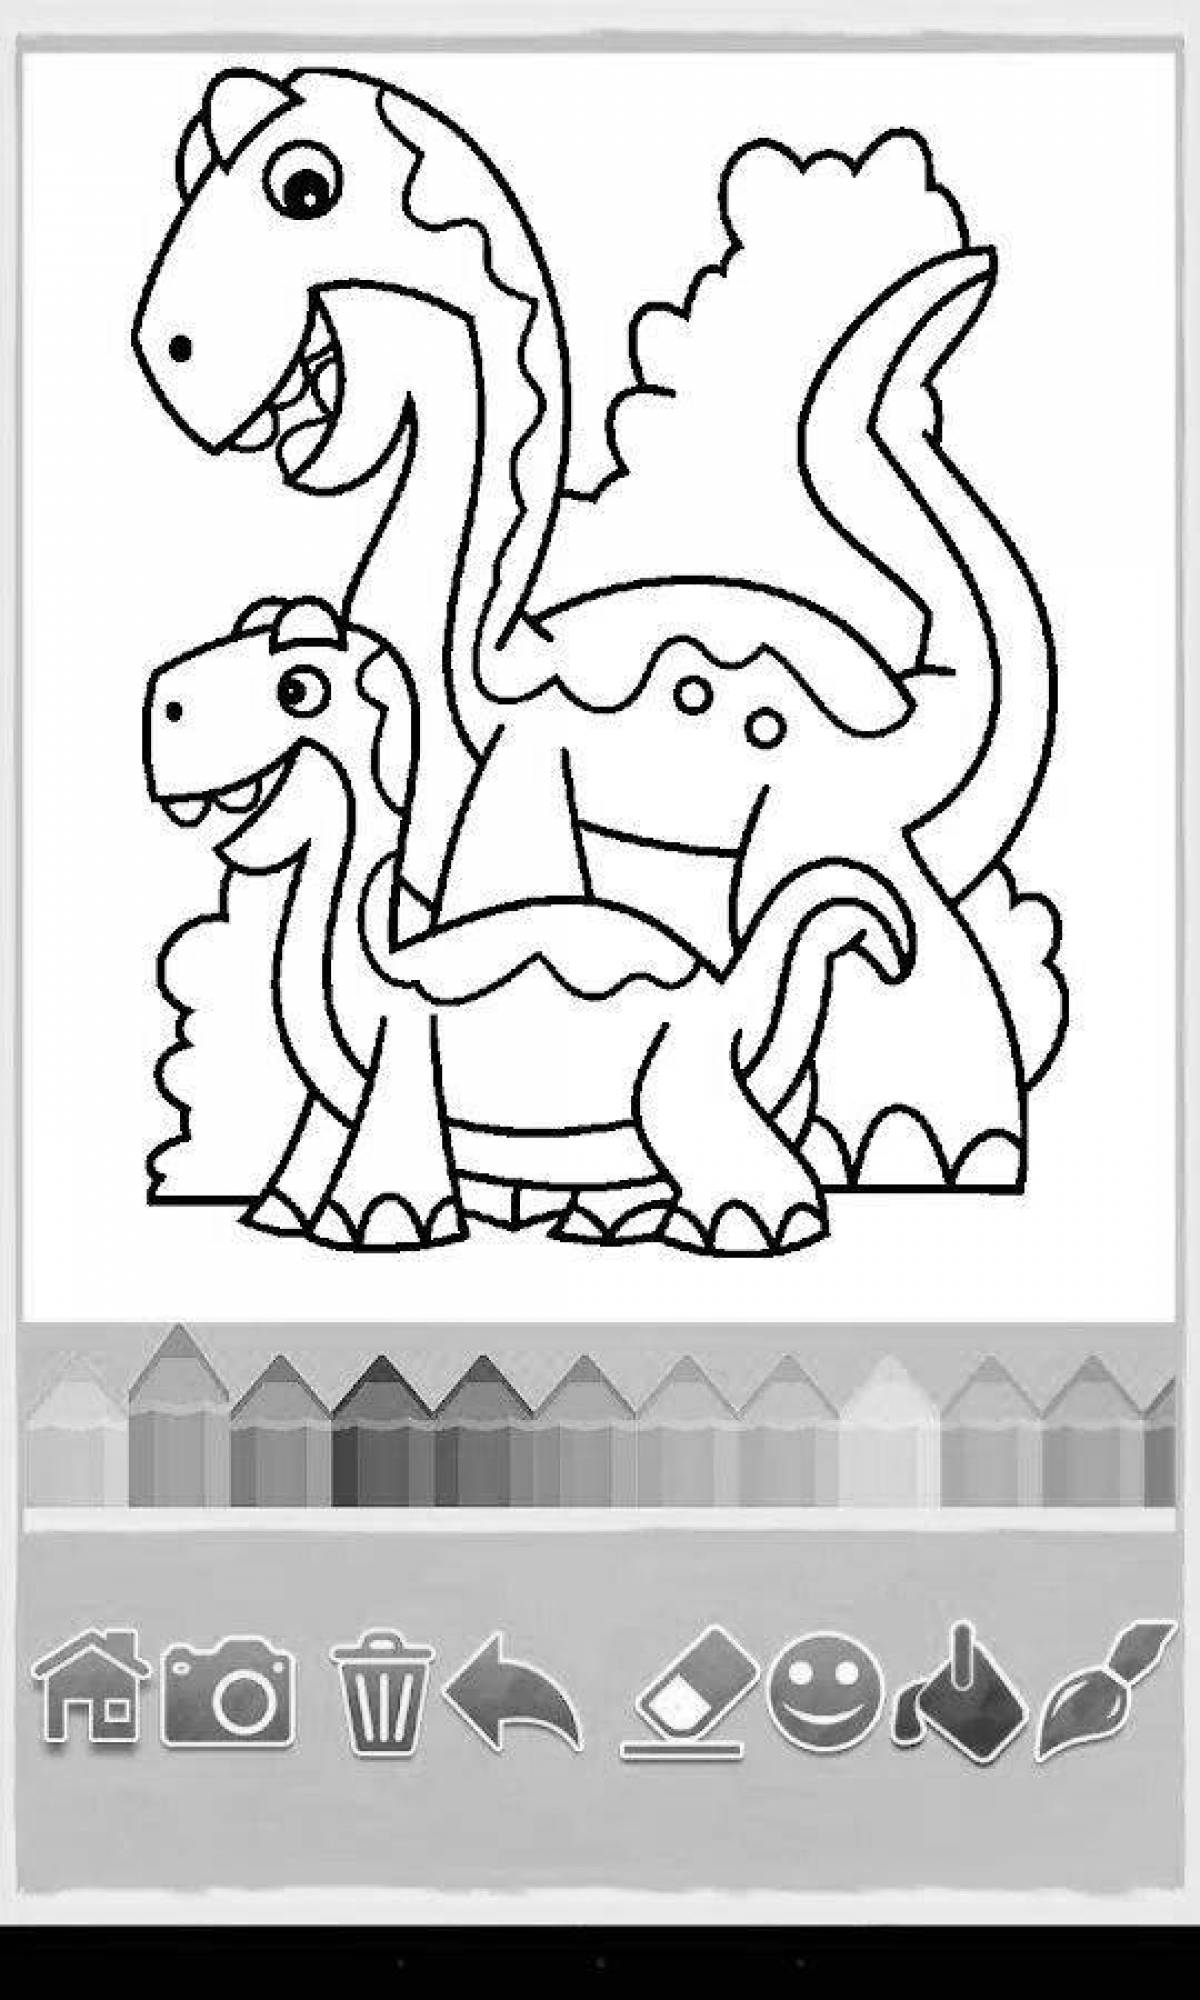 Dino Wonderful City Coloring Page